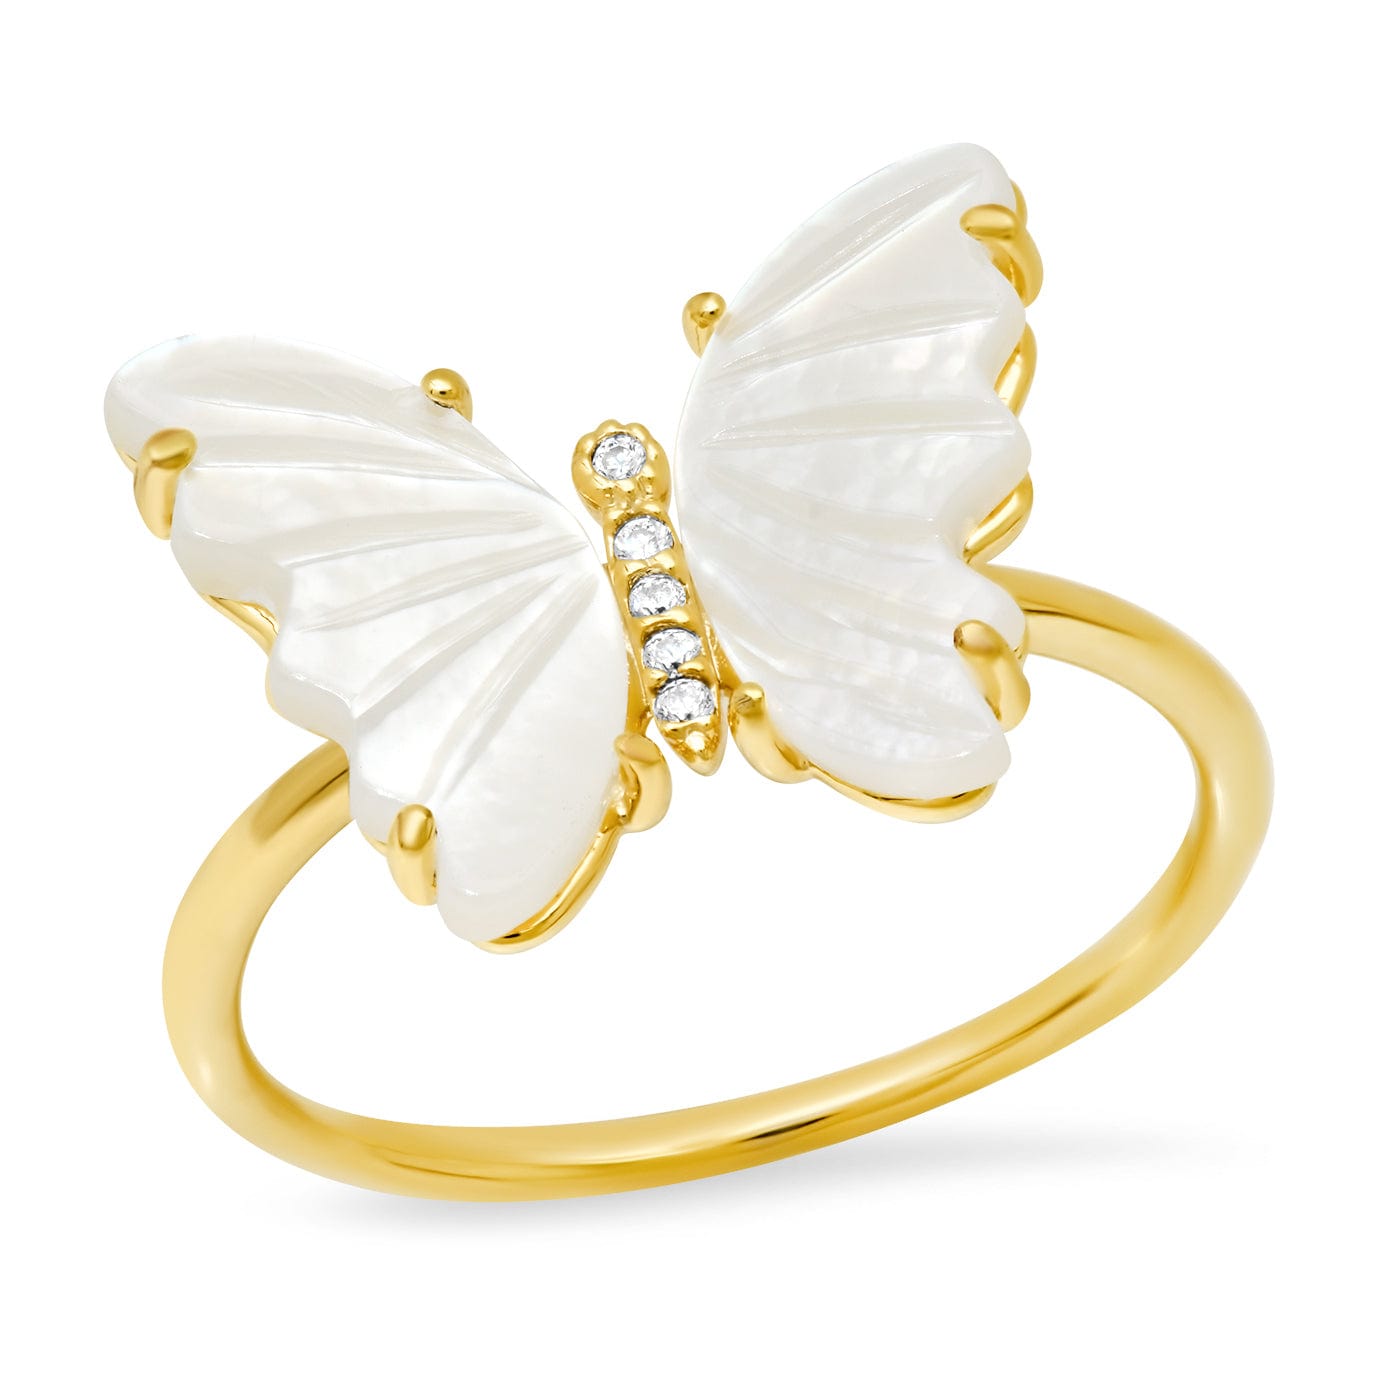 TAI JEWELRY Rings 6 Carved Butterfly Ring